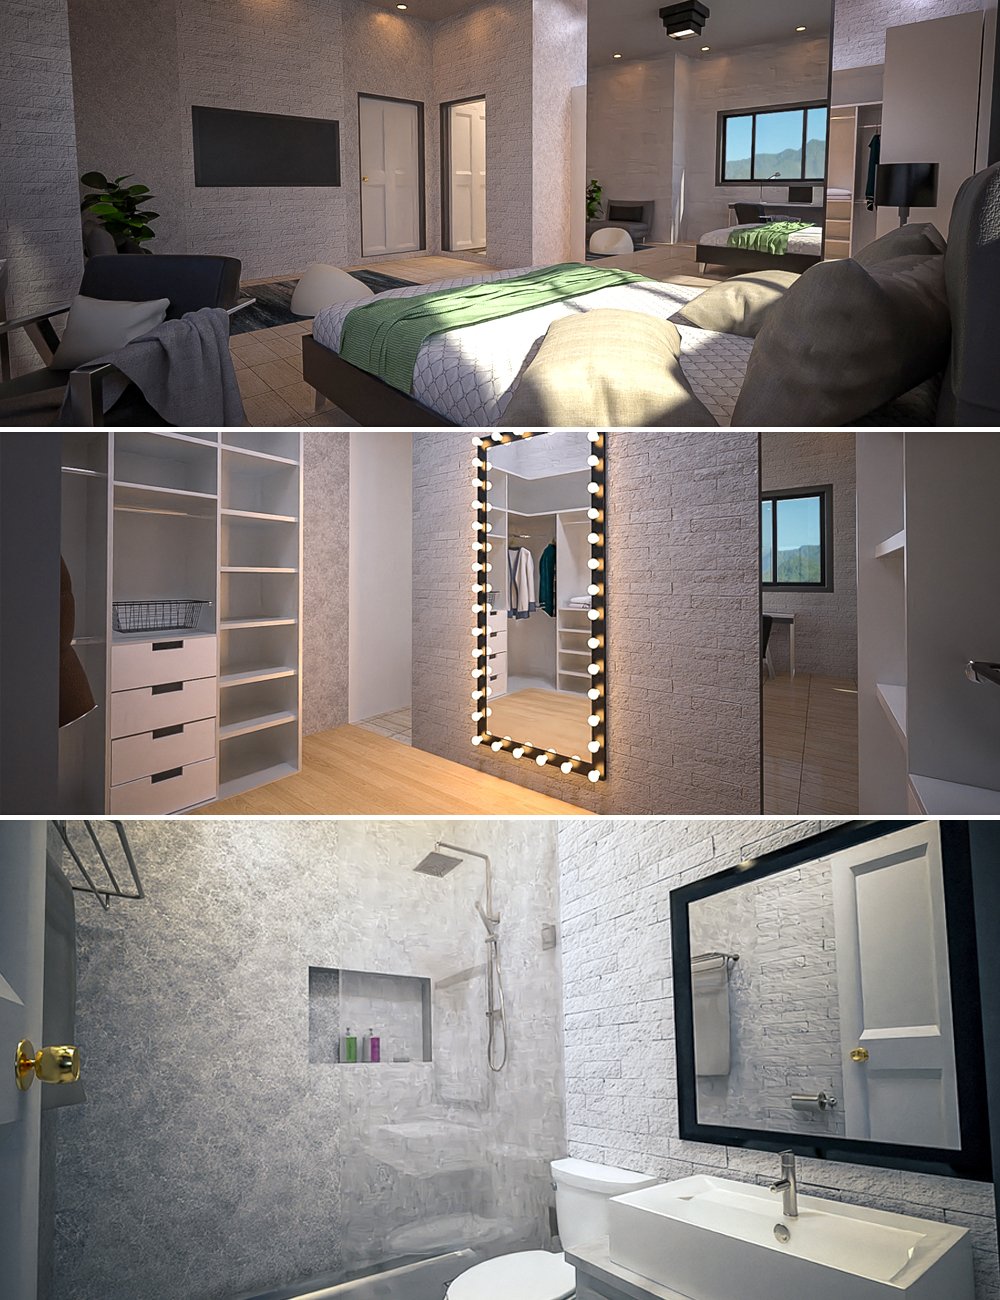 The Master Bedroom by: Tesla3dCorp, 3D Models by Daz 3D